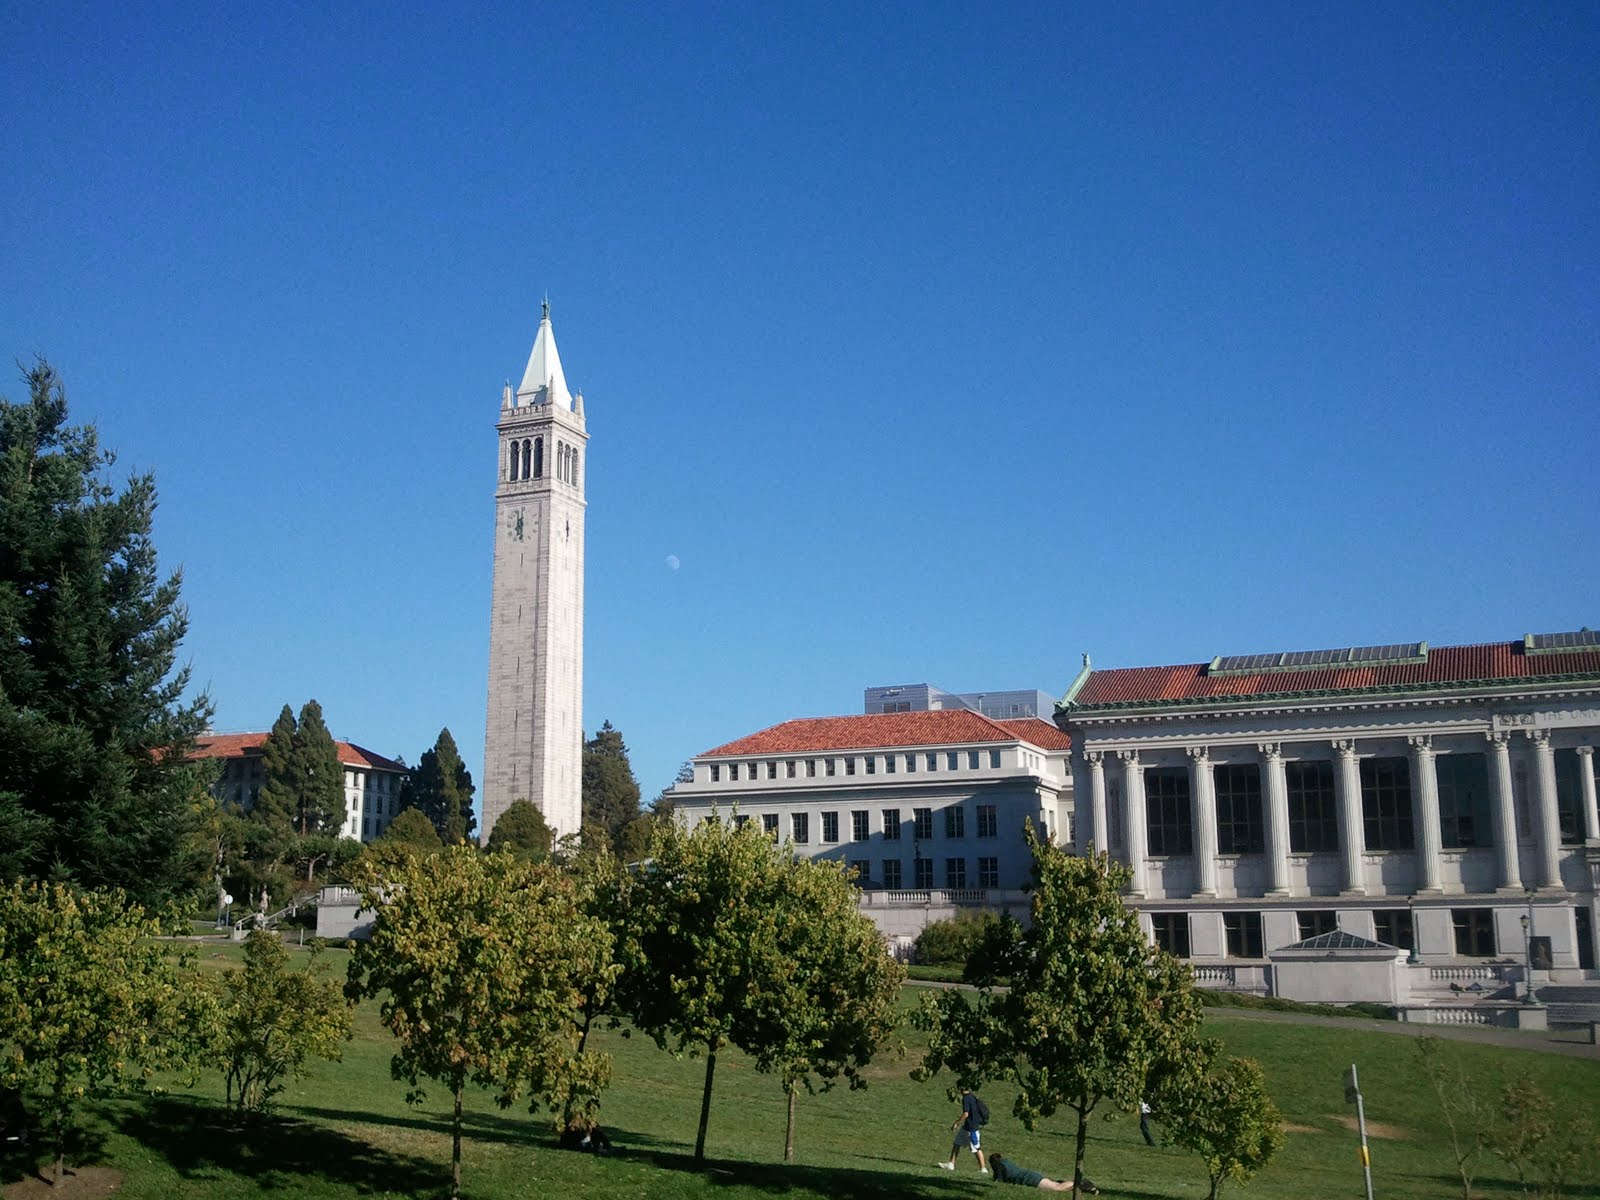 After Exploring The Campus We Headed To San Francisco Via Bay